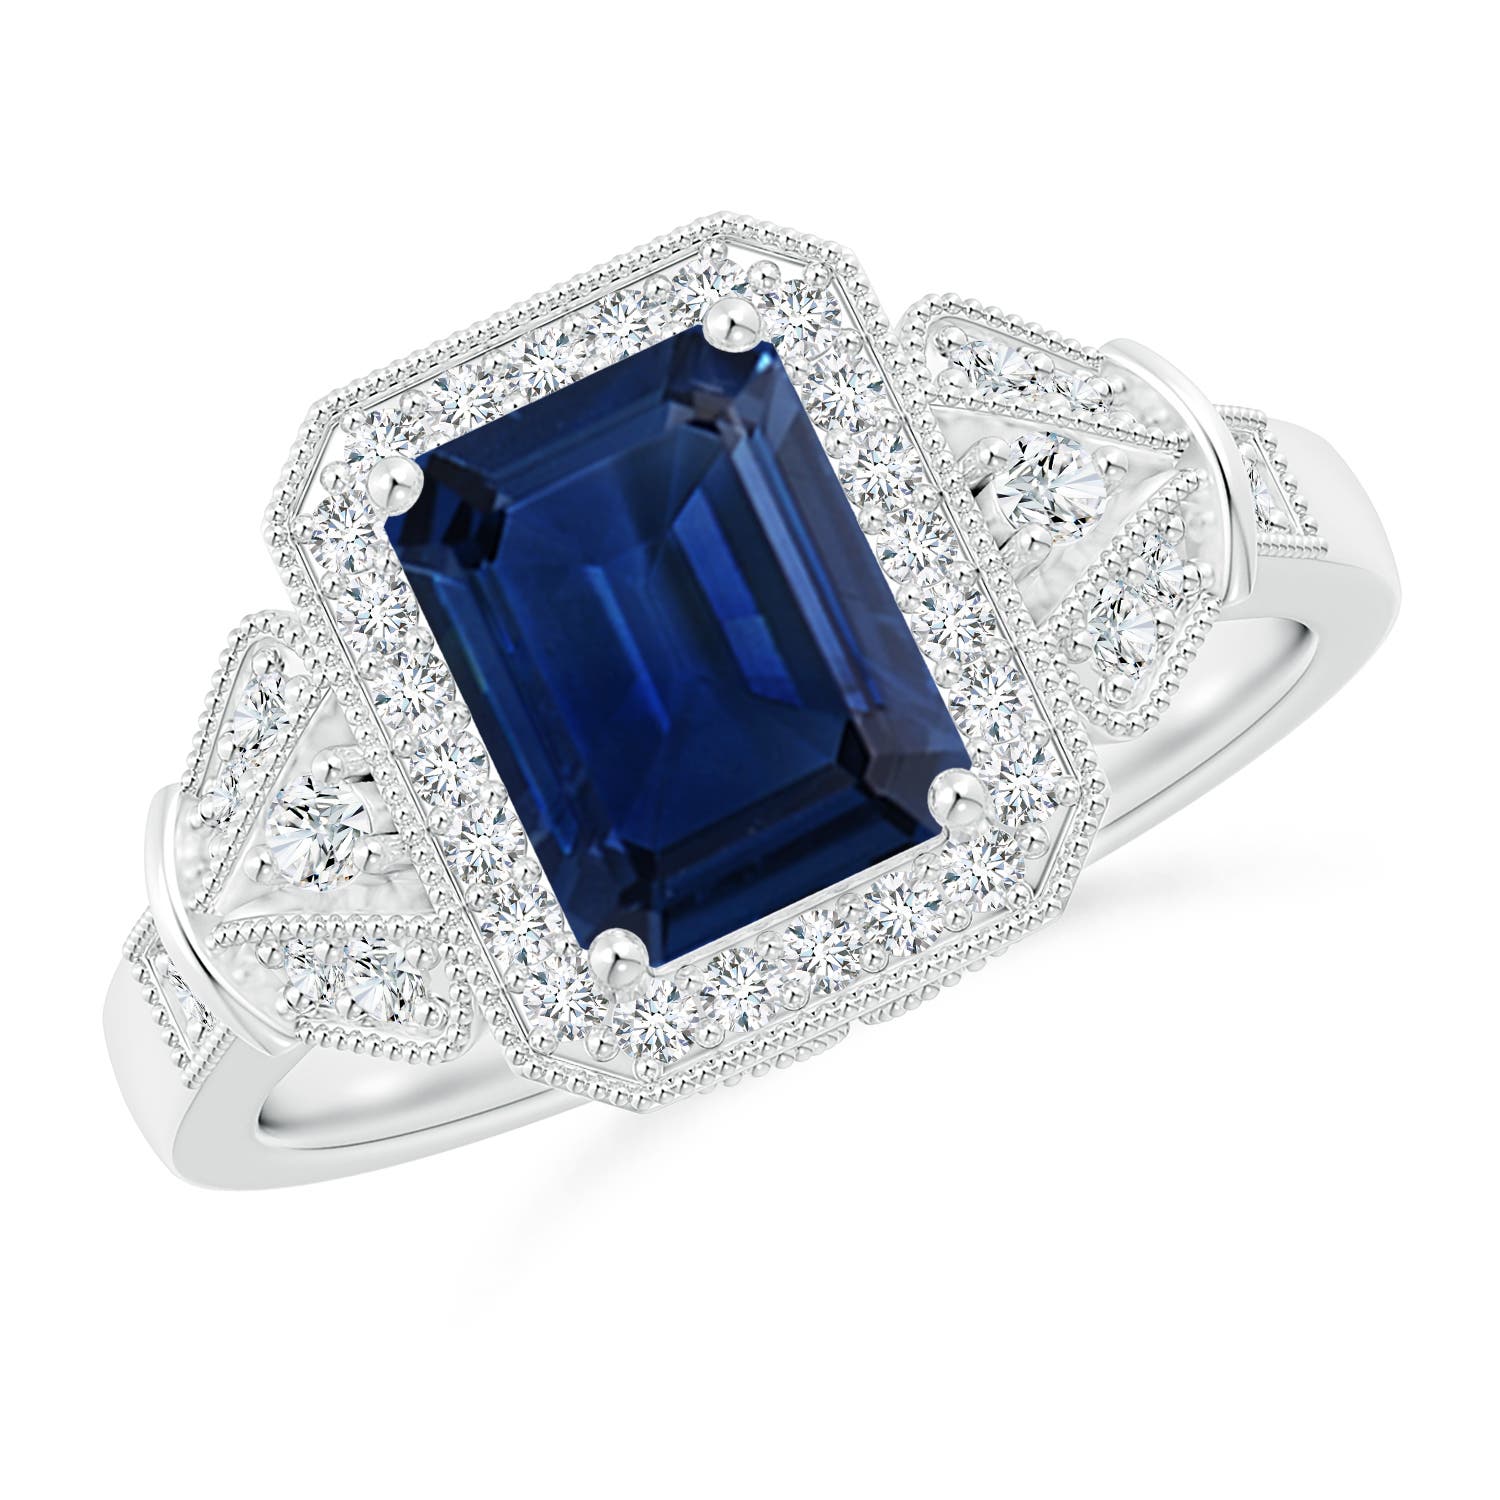 Aeon Vintage Style Emerald-Cut Sapphire Halo Engagement Ring with Milgrain